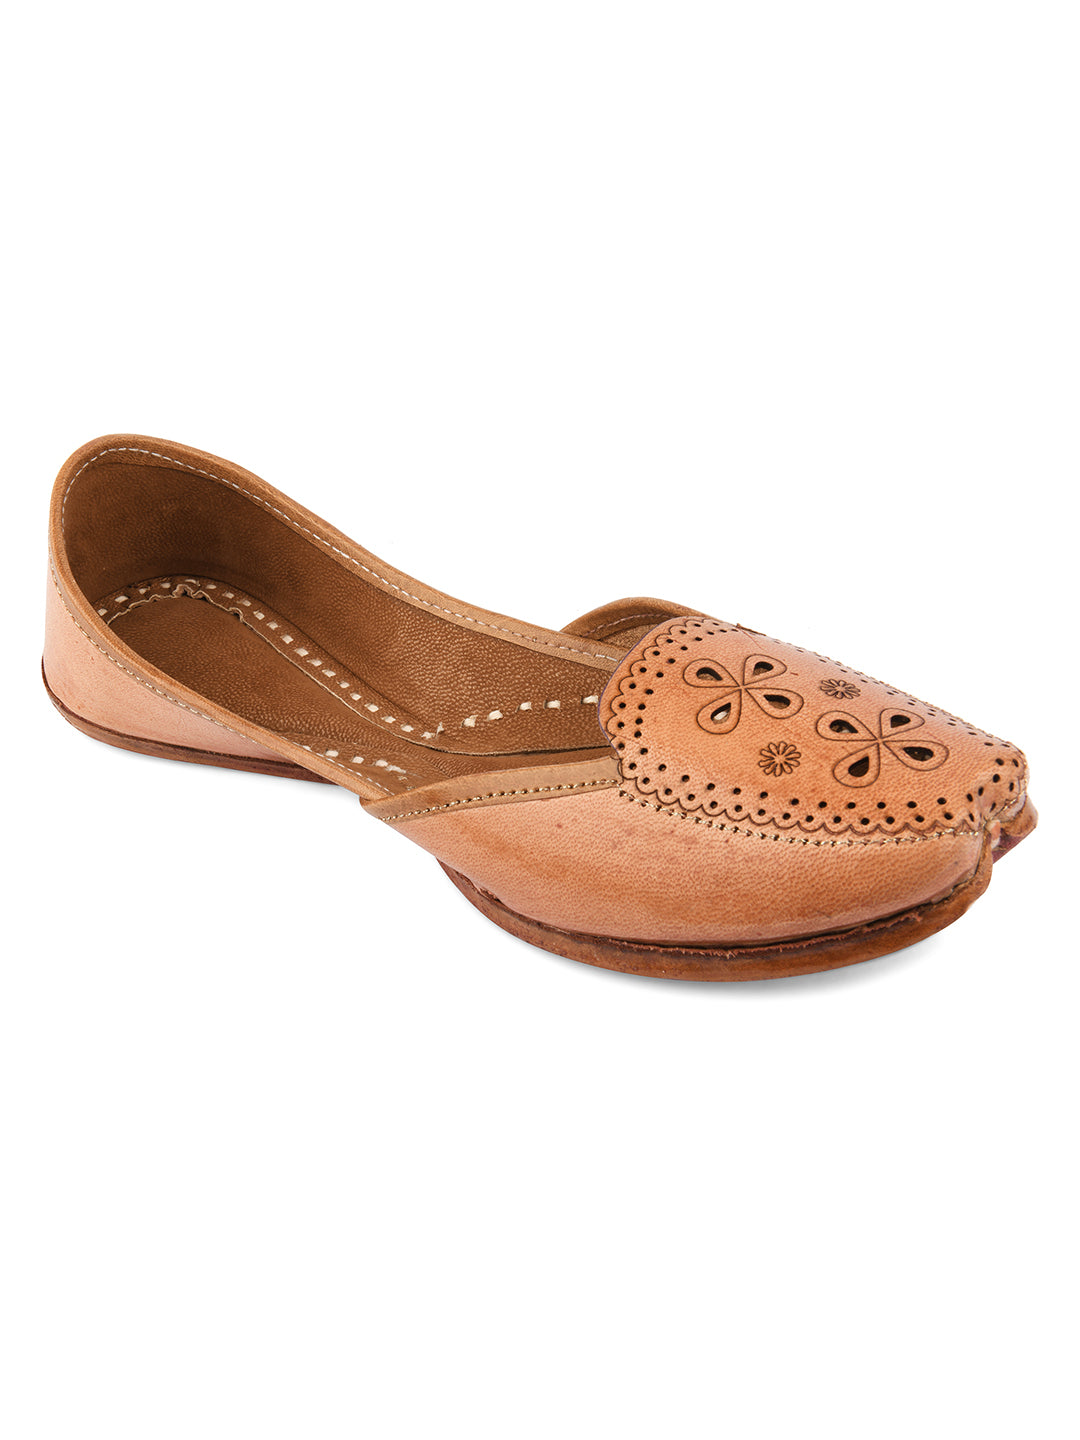 DESI COLOUR Women Nude-Coloured Embellished Leather Ethnic Mojaris with Laser Cuts Flats